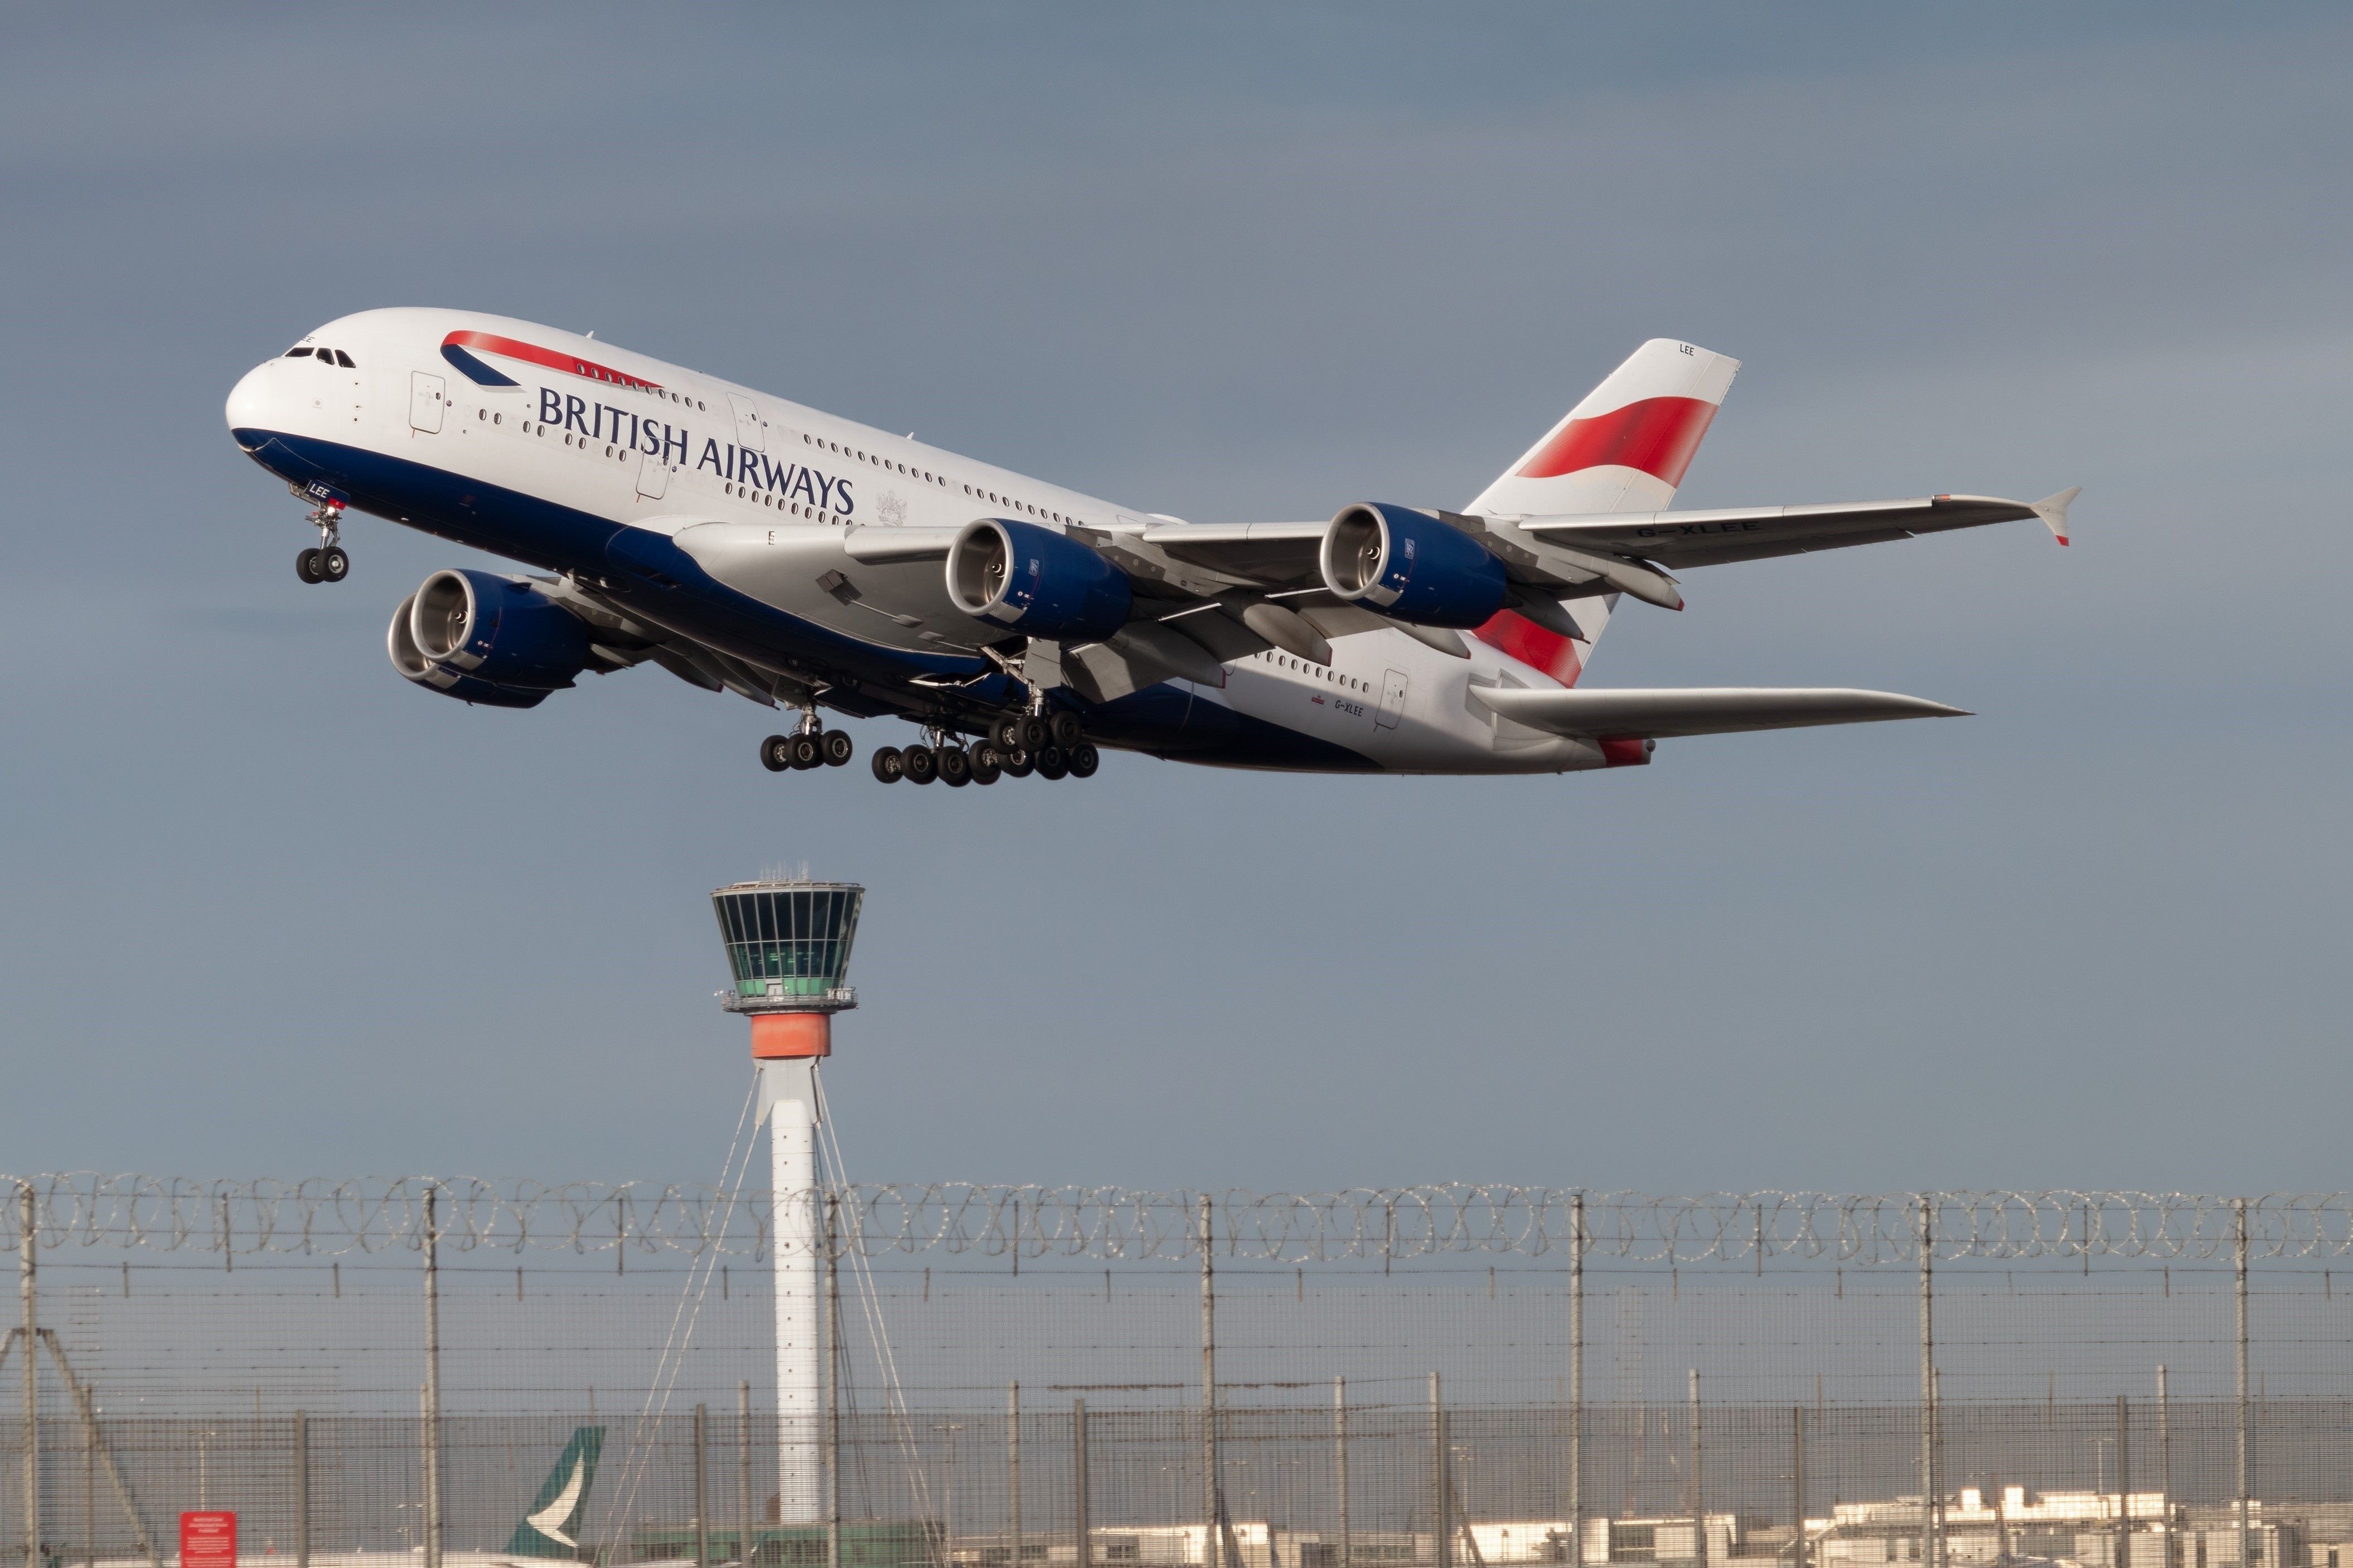 A British Airways Airbus A380 Departing From London Heathrow Airport.